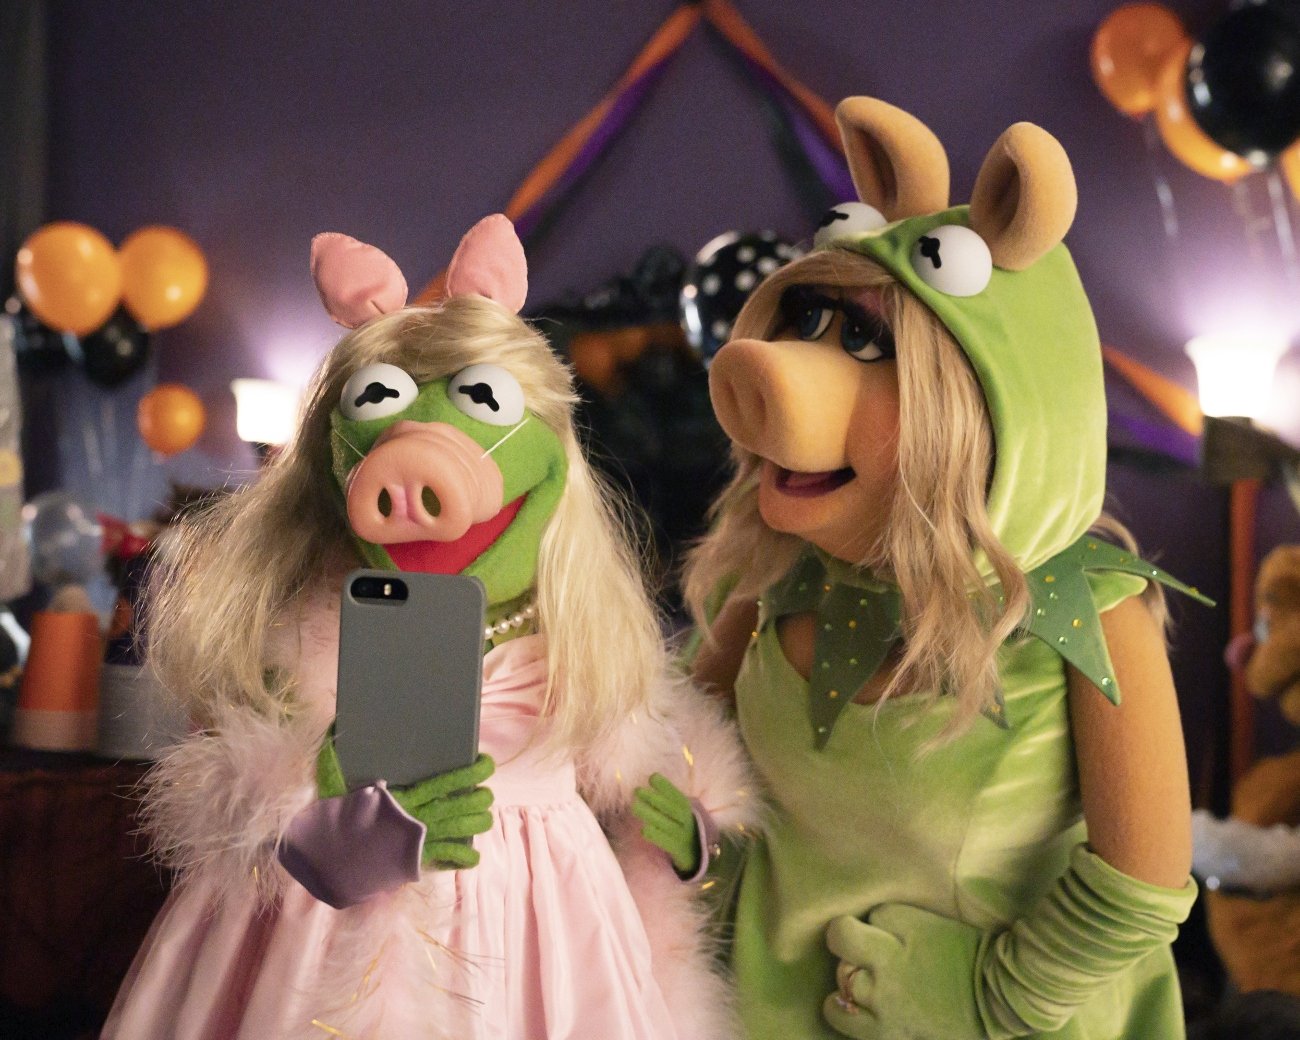 Kermit the frog and Miss Piggy in 'Muppets Haunted Mansion'